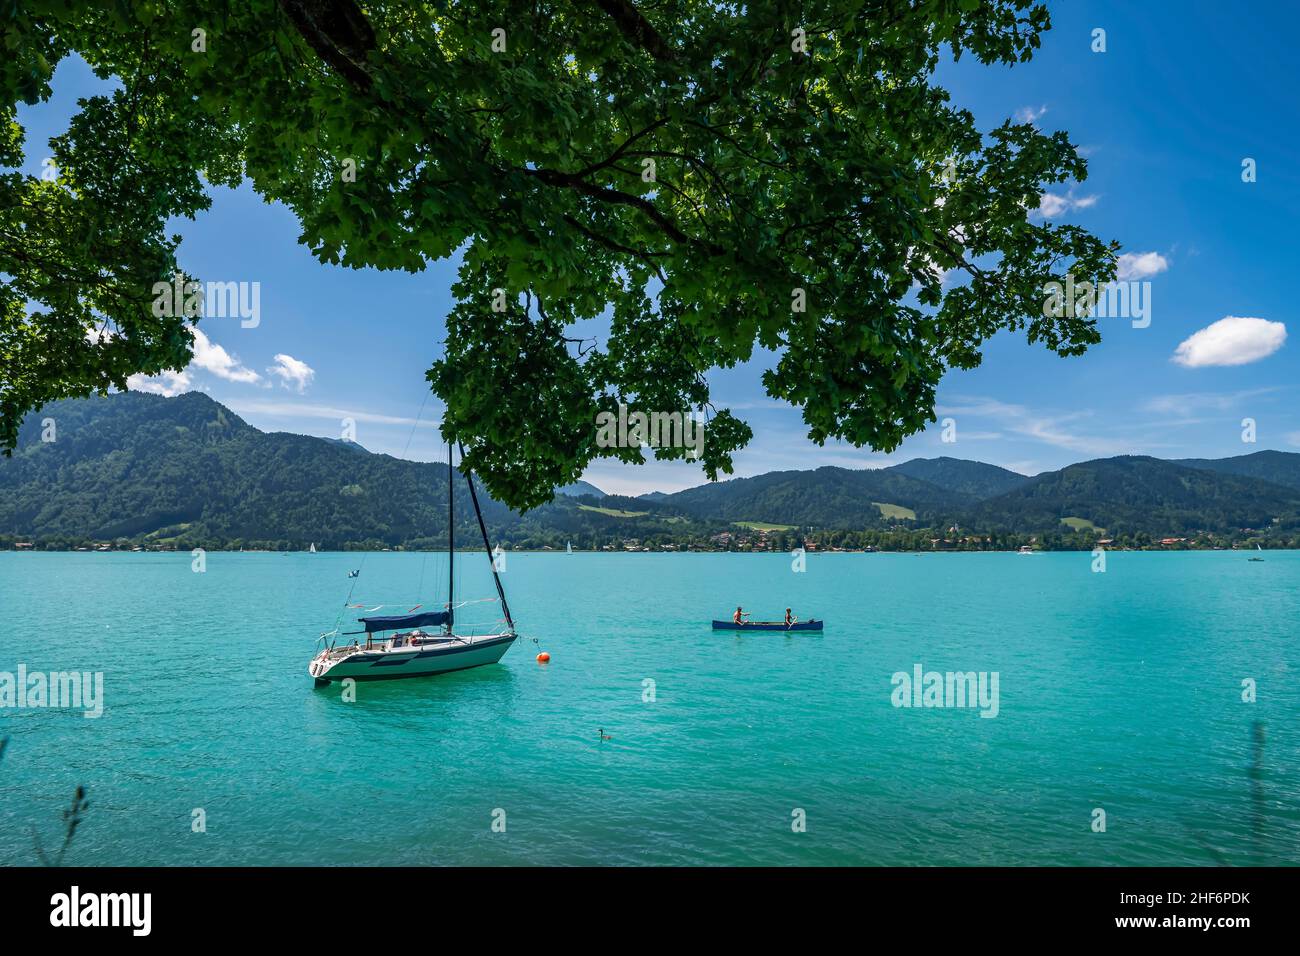 Turquiose Tegernsee. The popular lake in the heart of bavaria with a beautiful green bluish water color in summer with a boat and two canoying people Stock Photo